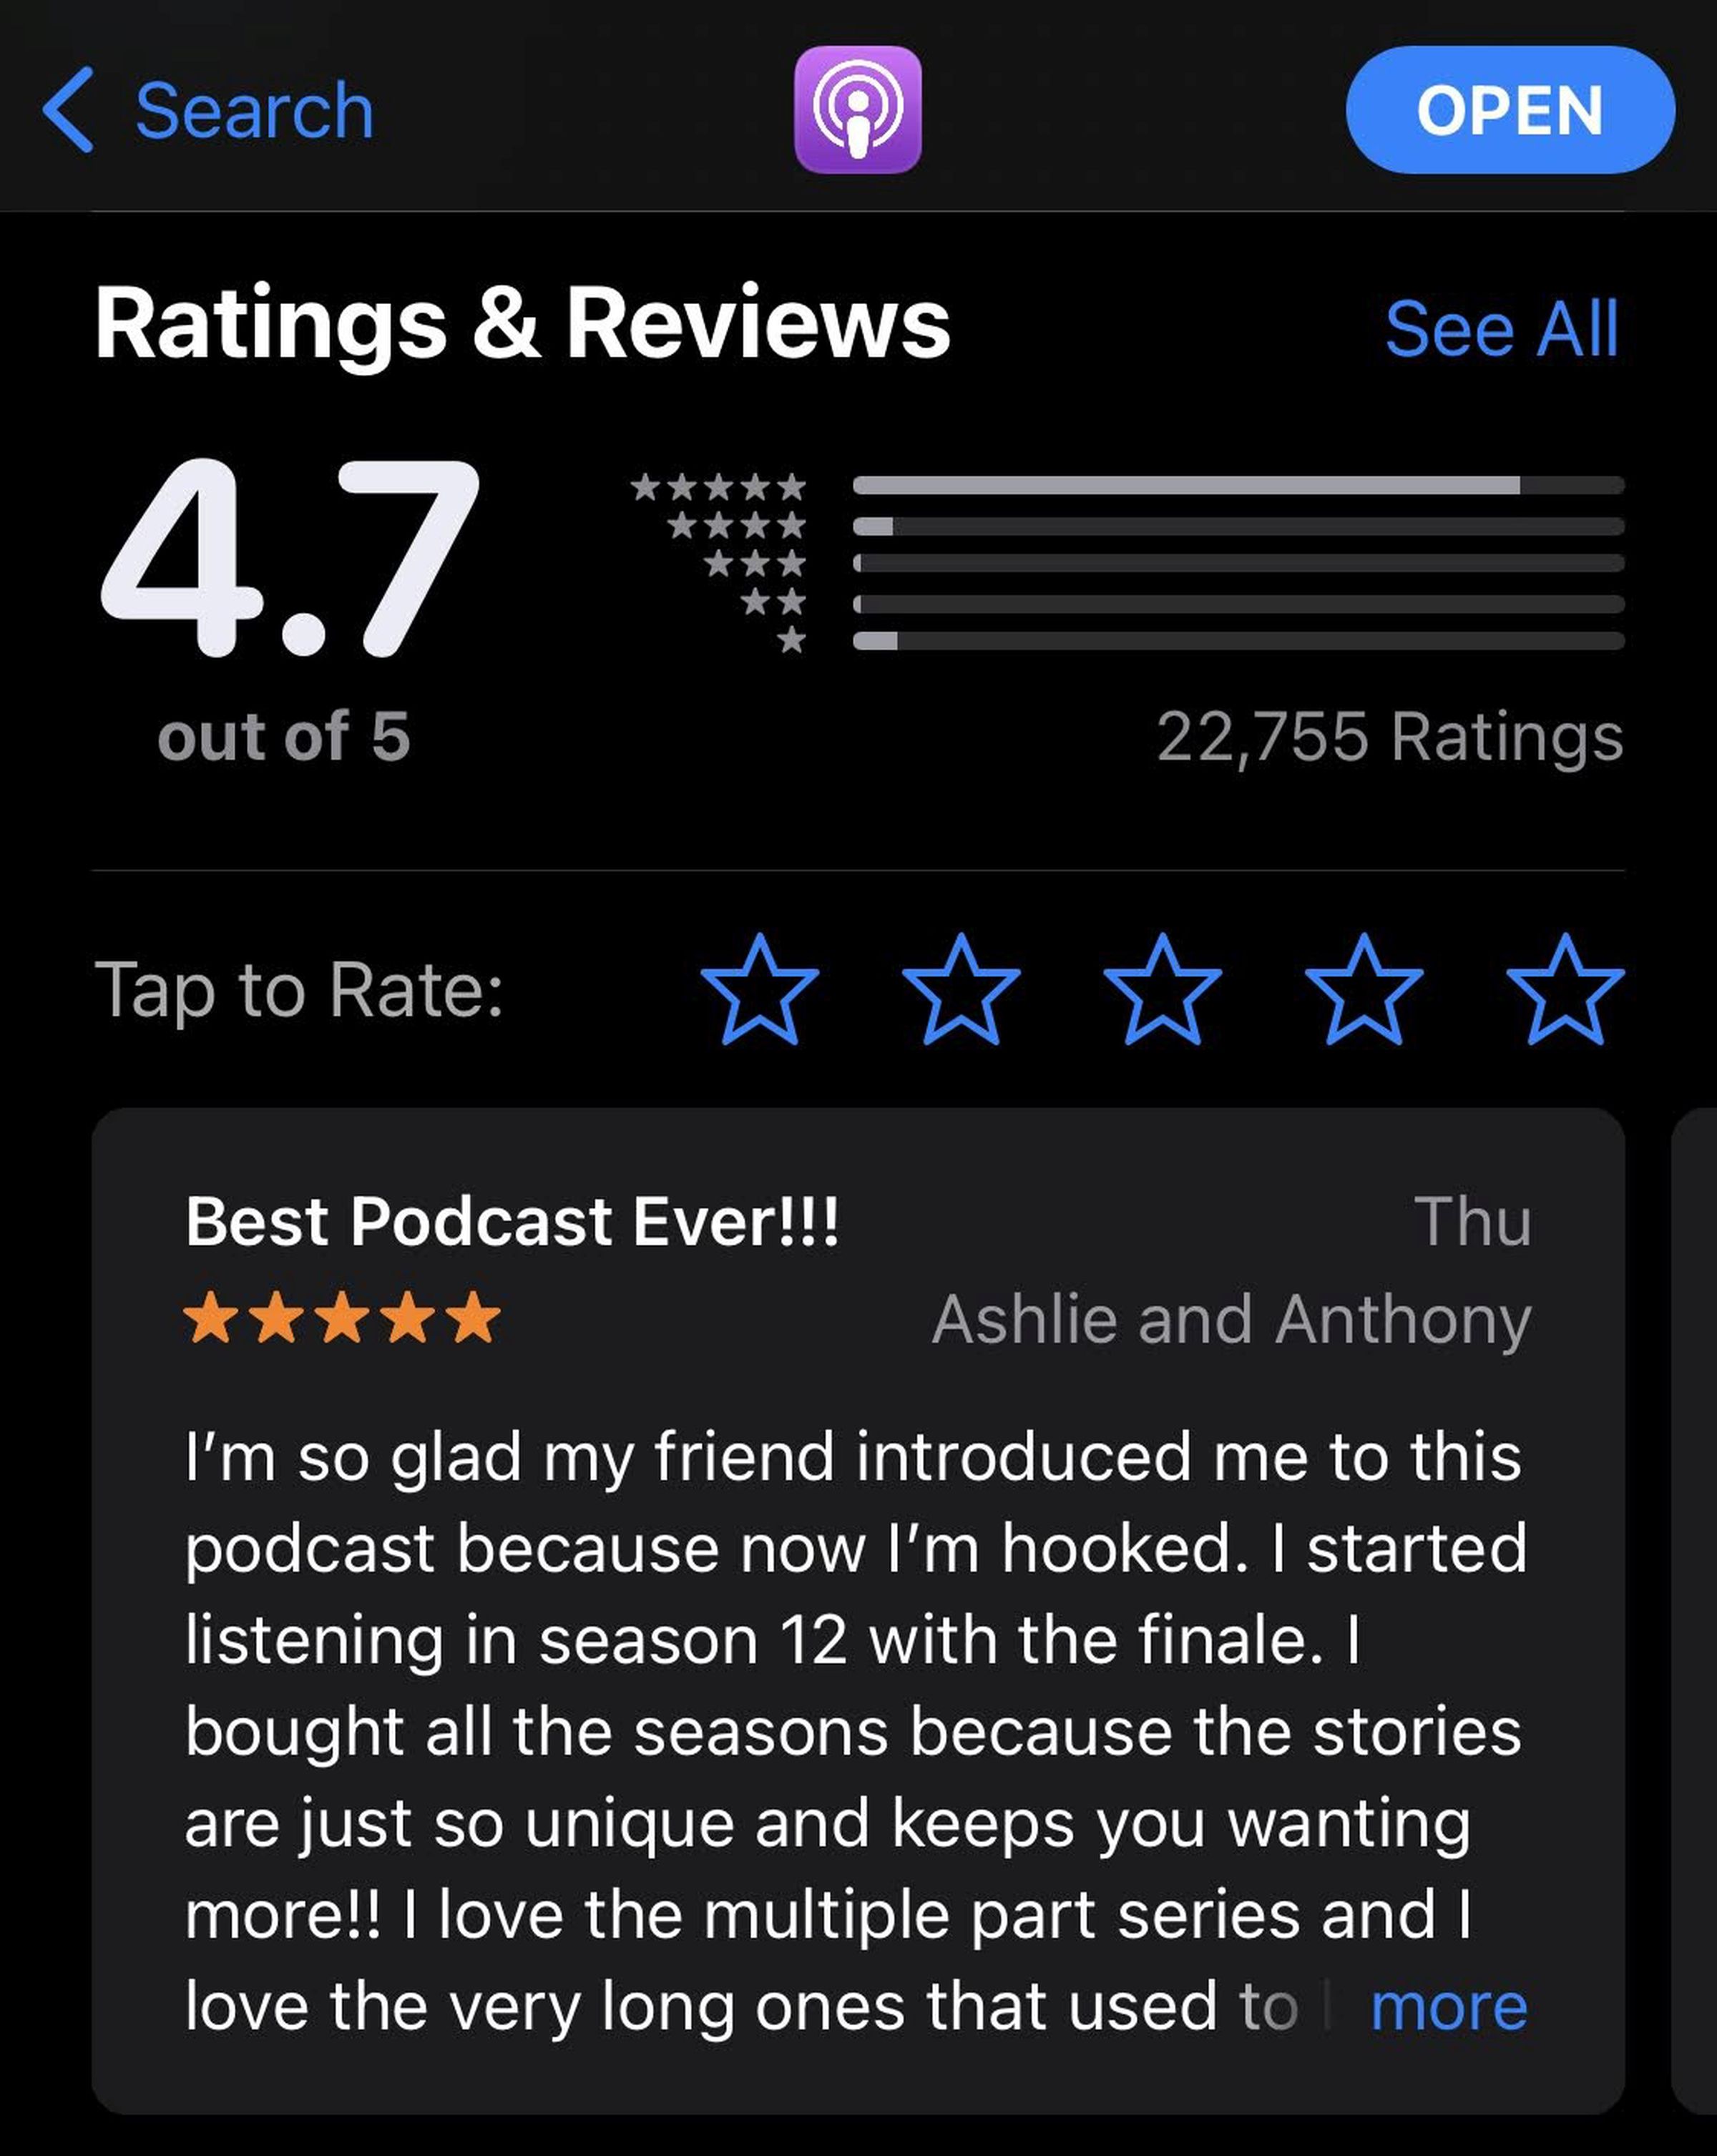 Apple deems this the “Most Helpful” review of its Podcasts app.